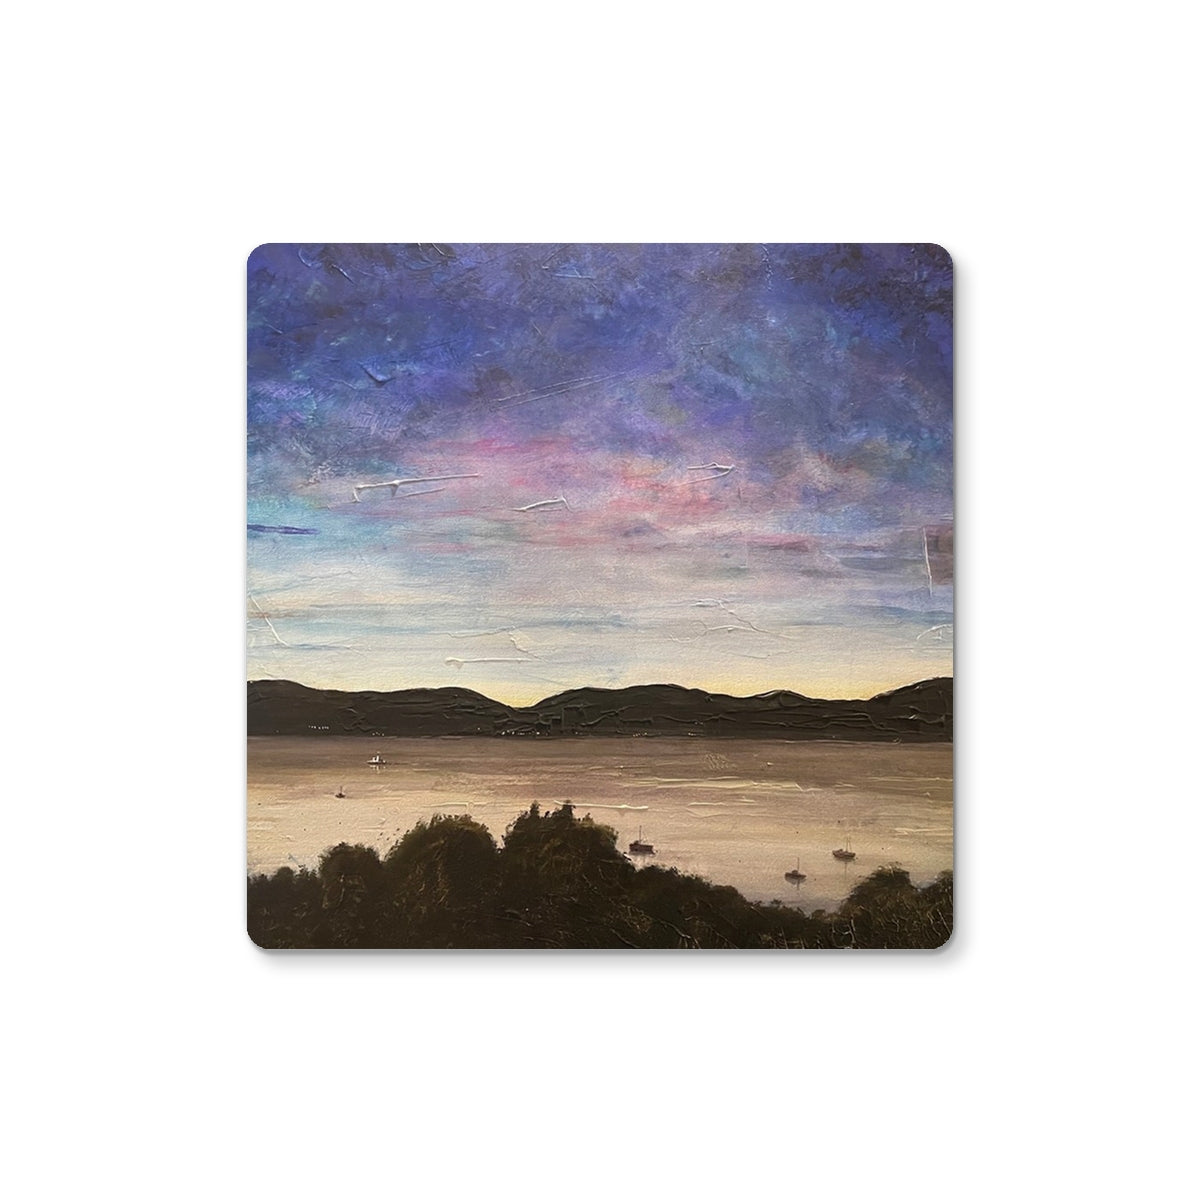 River Clyde Twilight Art Gifts Coaster-Coasters-River Clyde Art Gallery-Single Coaster-Paintings, Prints, Homeware, Art Gifts From Scotland By Scottish Artist Kevin Hunter